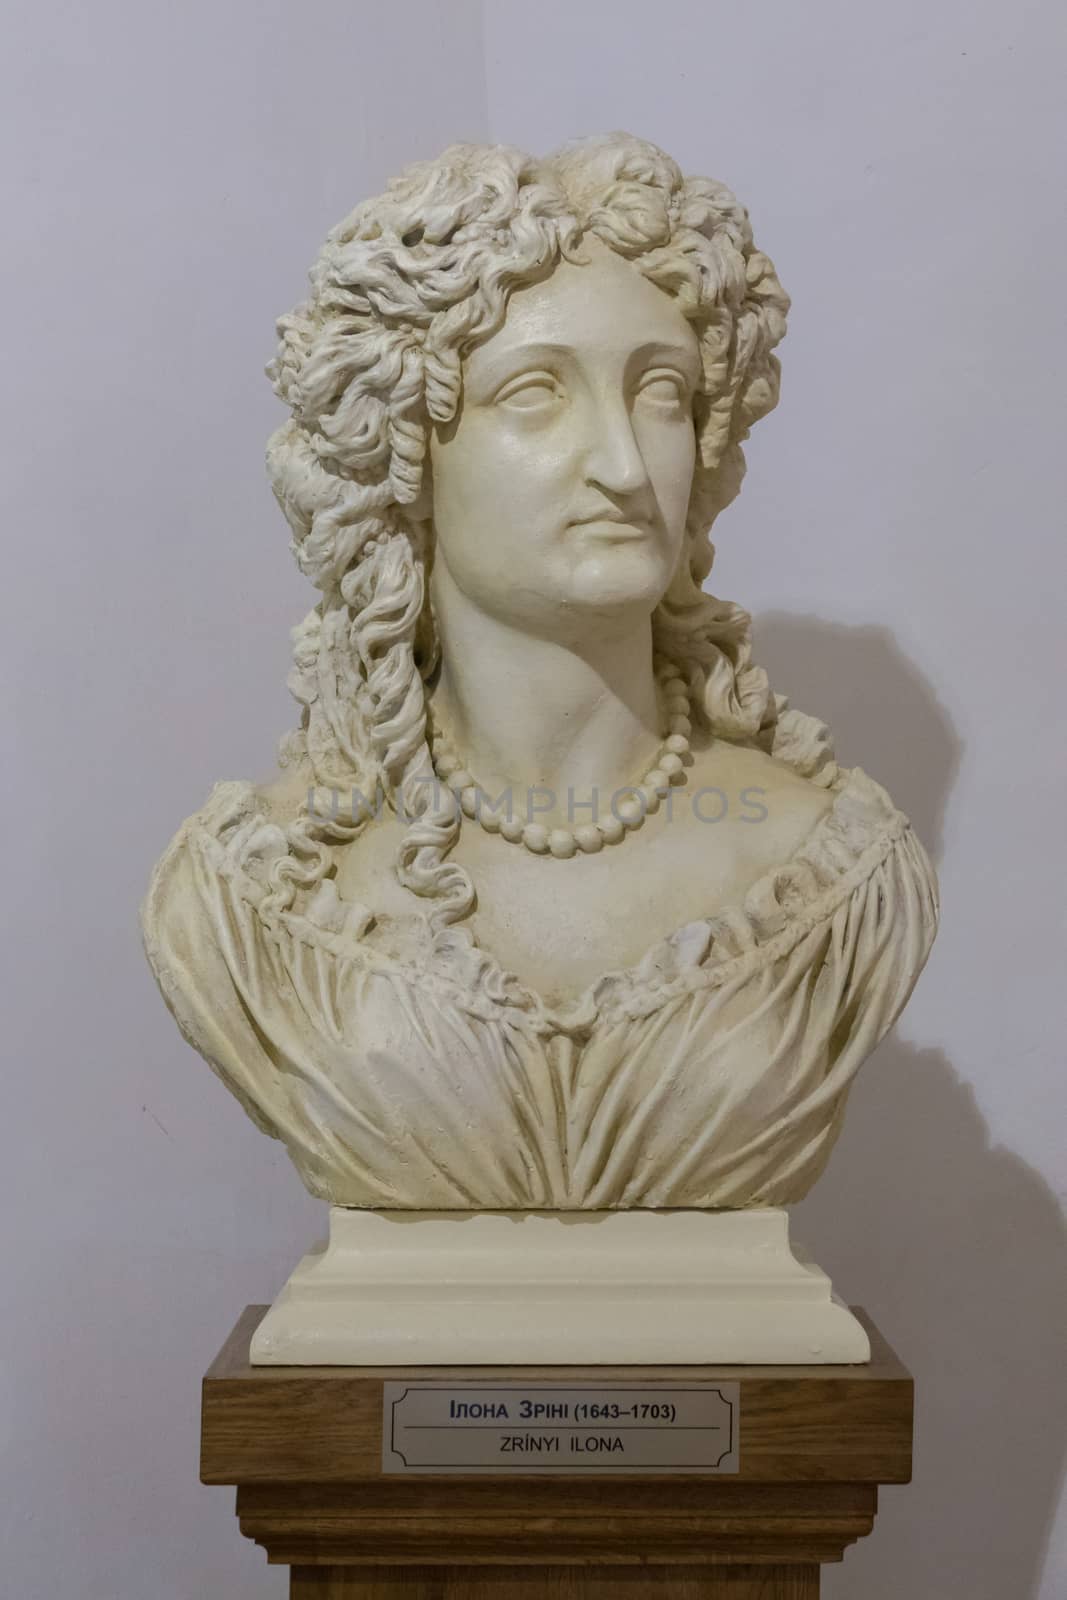 historically a woman's bust in a museum with a commemorative plaque